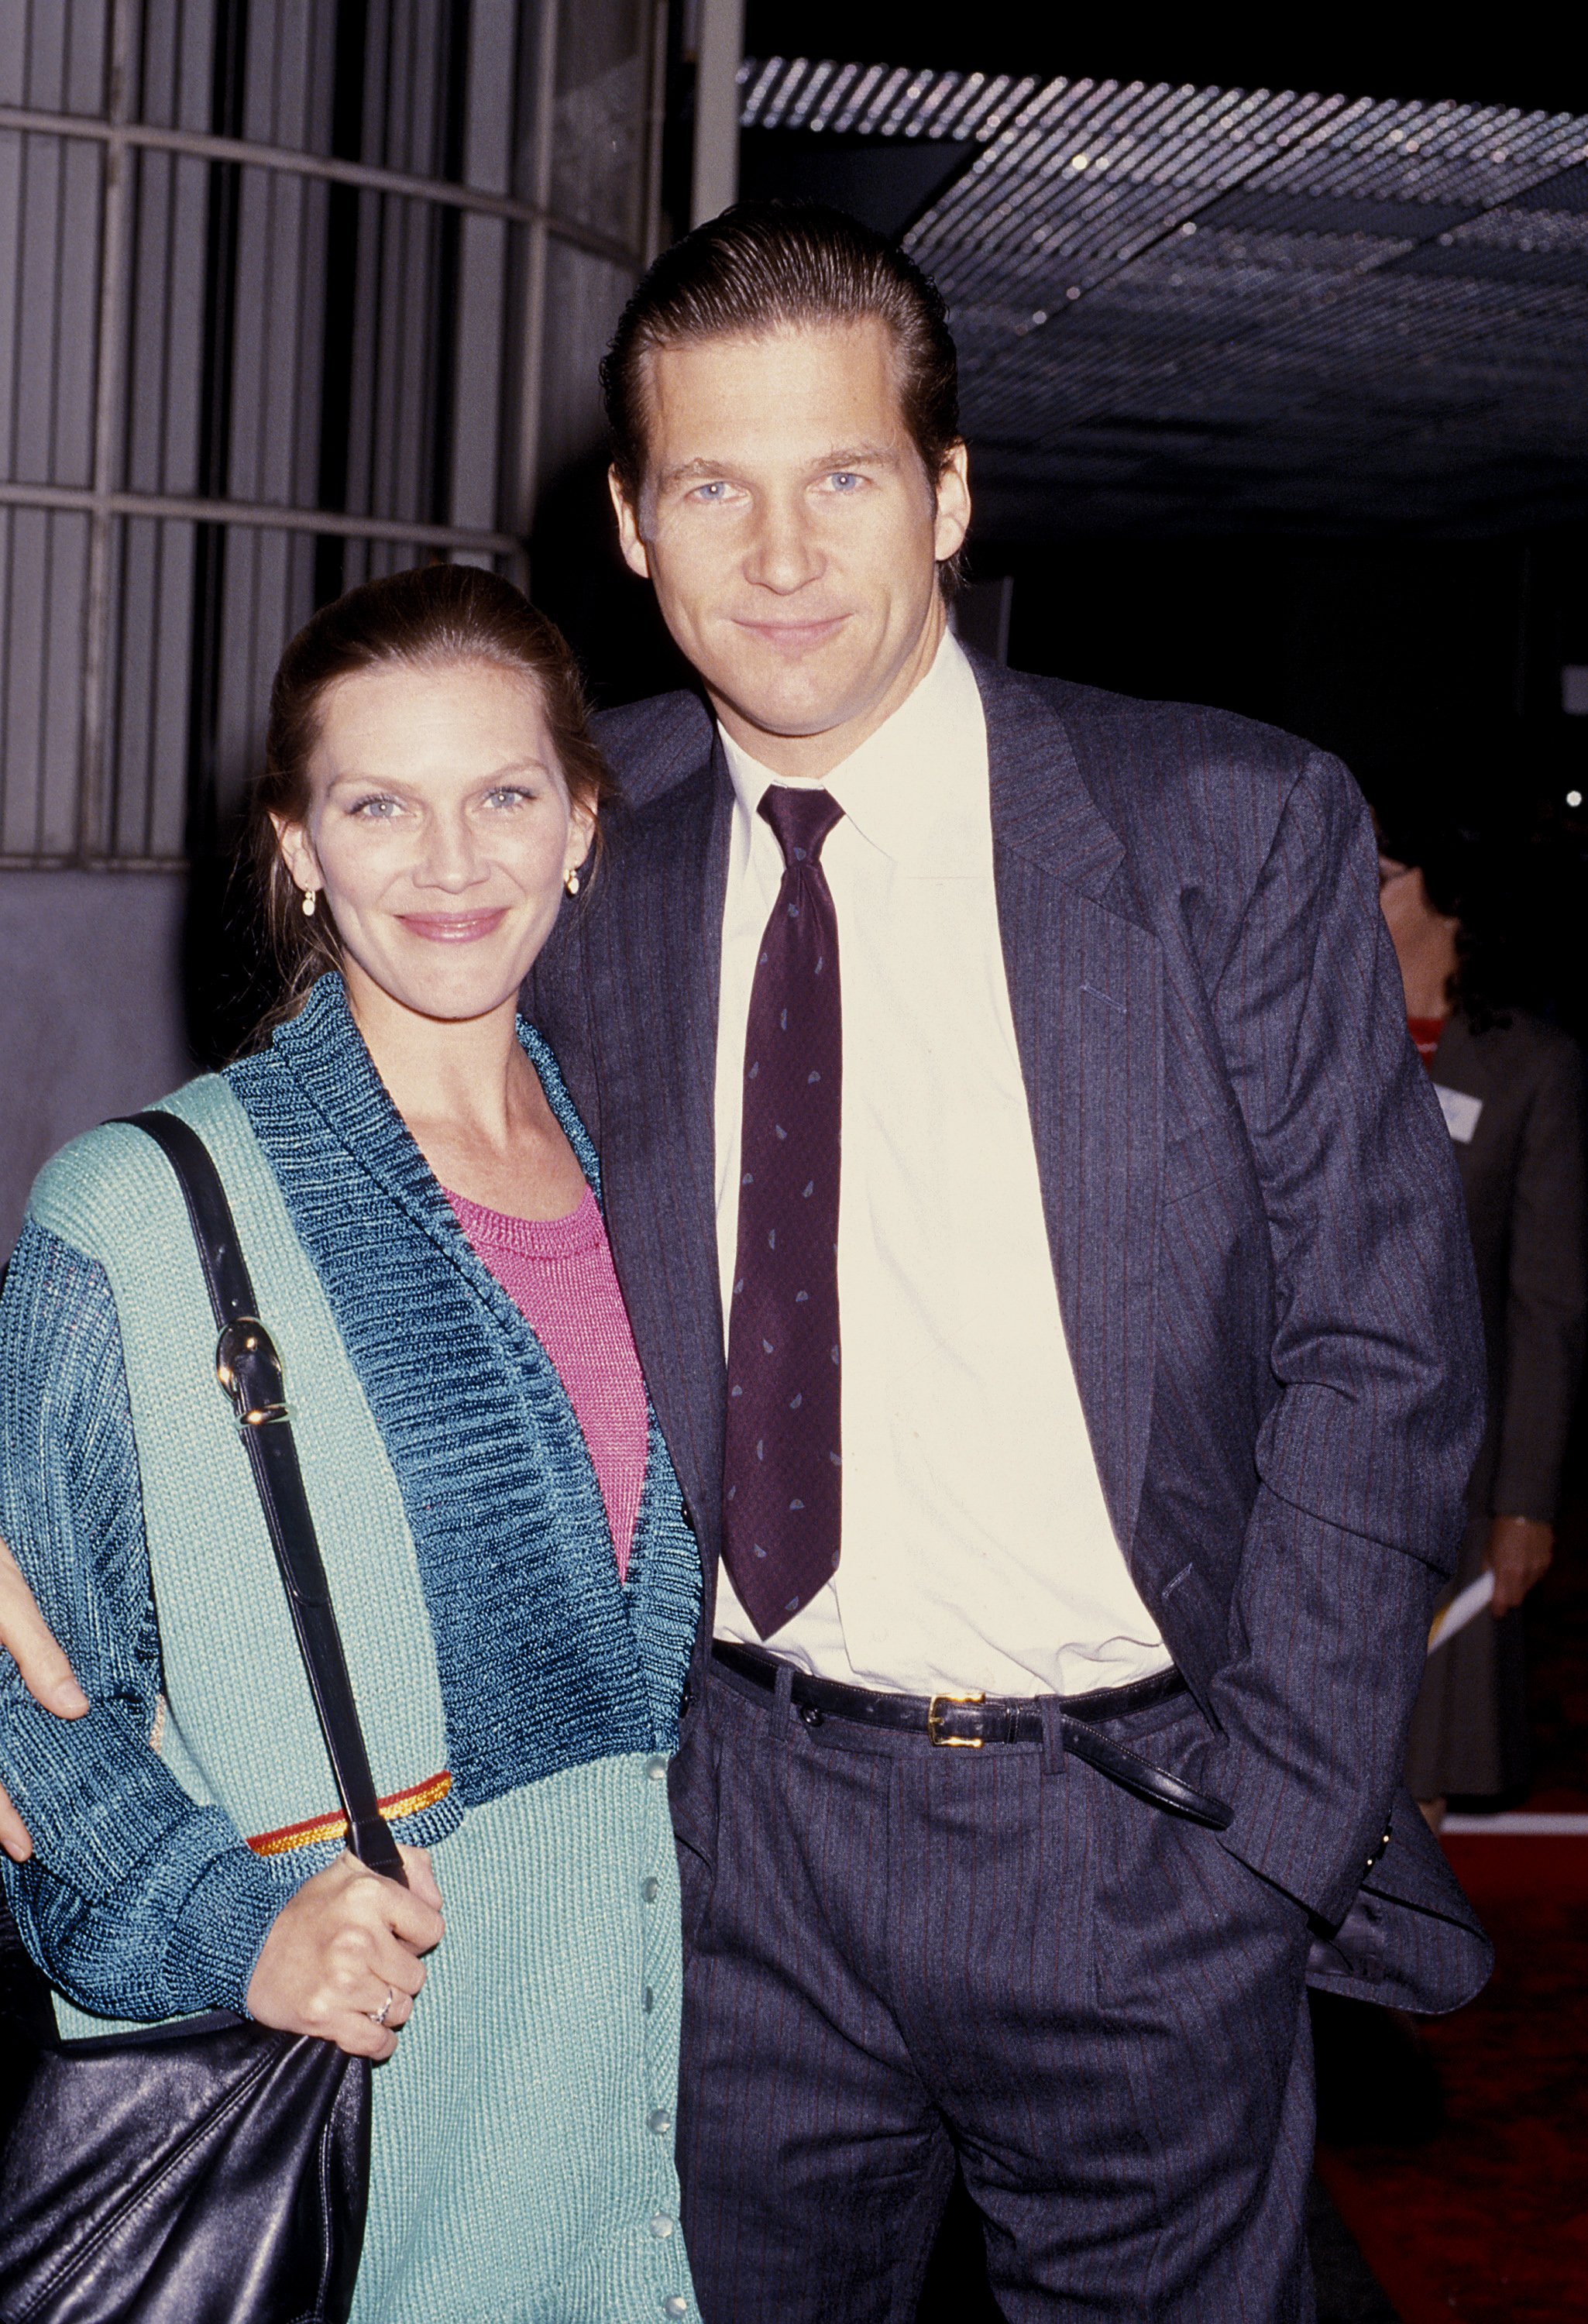 Susan Bridges and Jeff Bridges. December 18, 1986 at MGM Studios in Culver City, California, United States | Source: Getty Images 